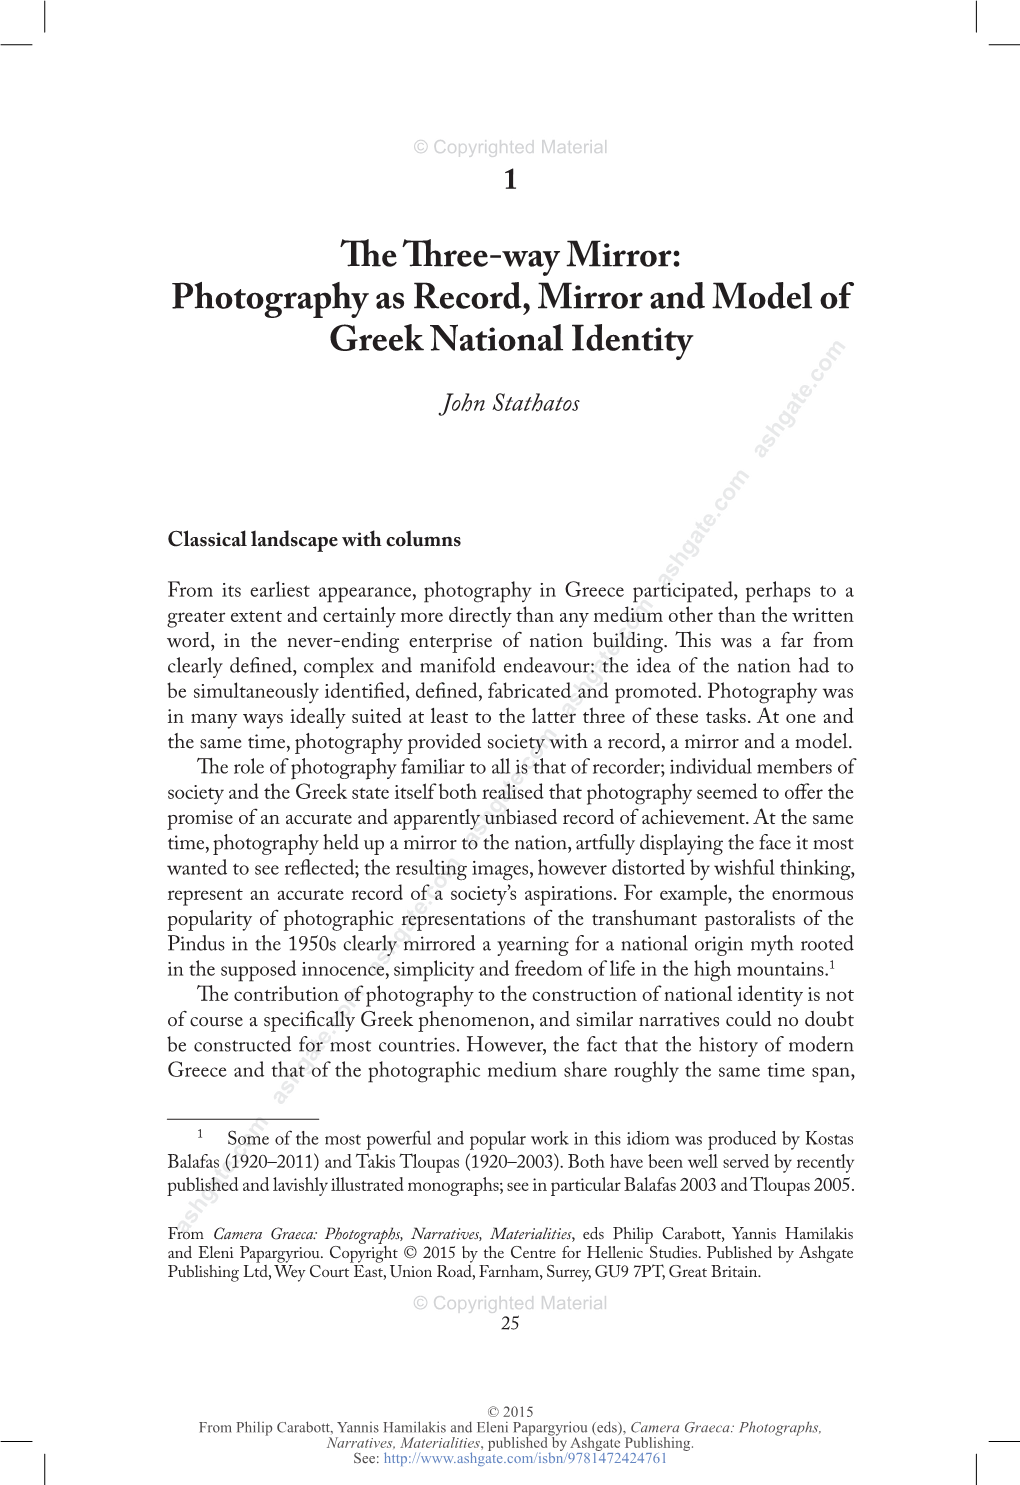 The Three-Way Mirror: Photography As Record, Mirror and Model of Greek National Identity